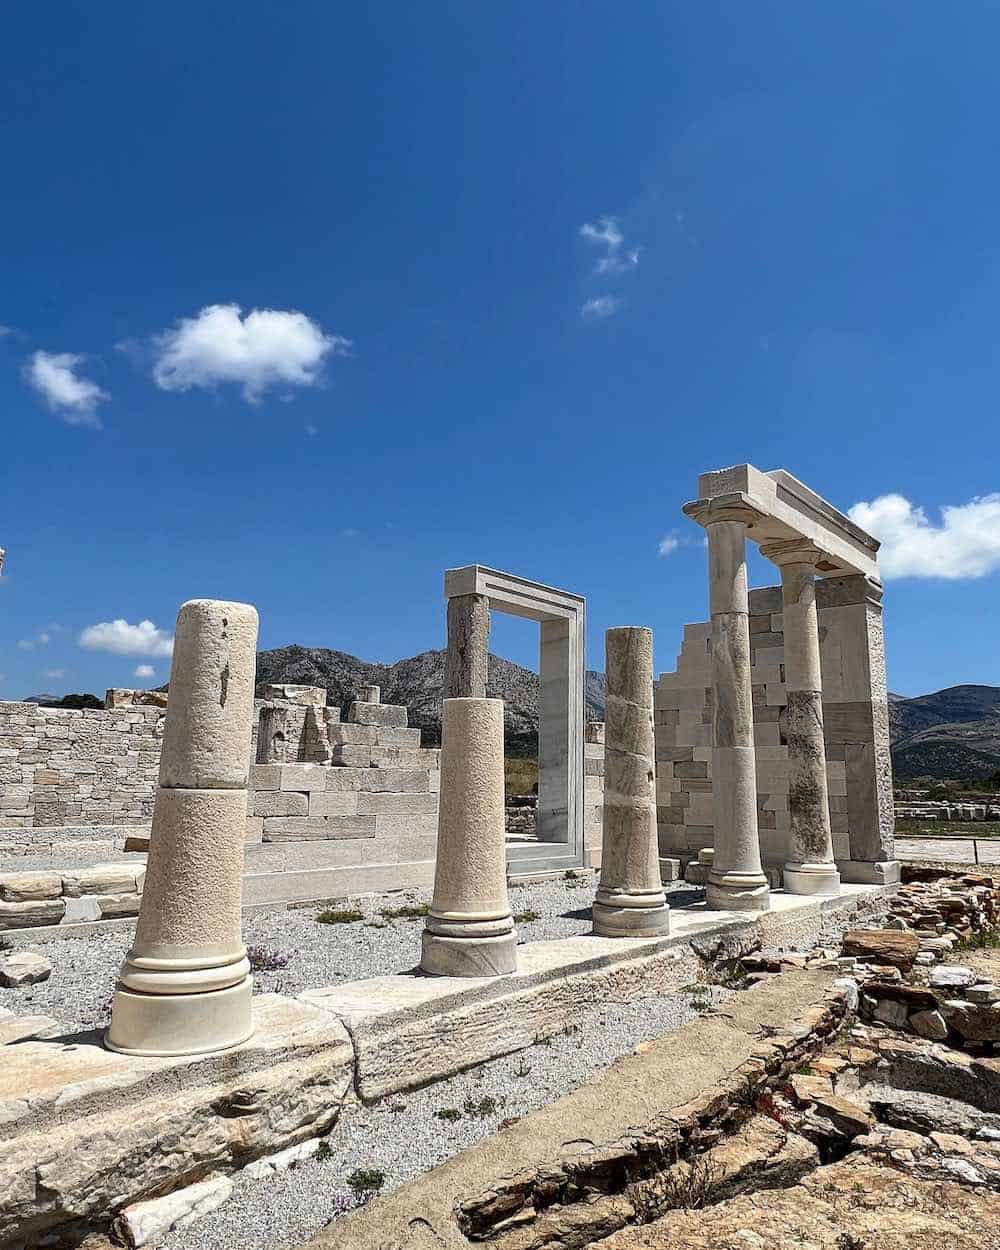 The Temple of Demeter is a top attraction on the island of Naxos Greece.